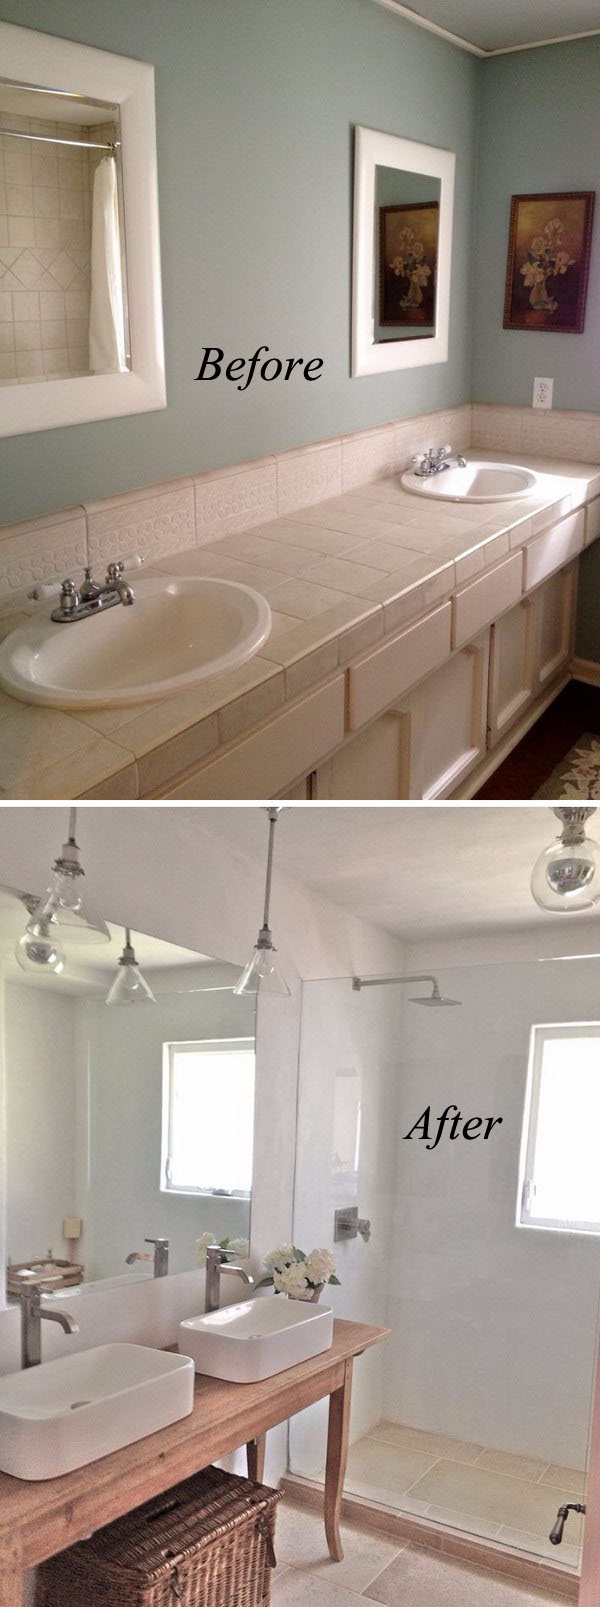 37-38-bathroom-remodel-before-and-after